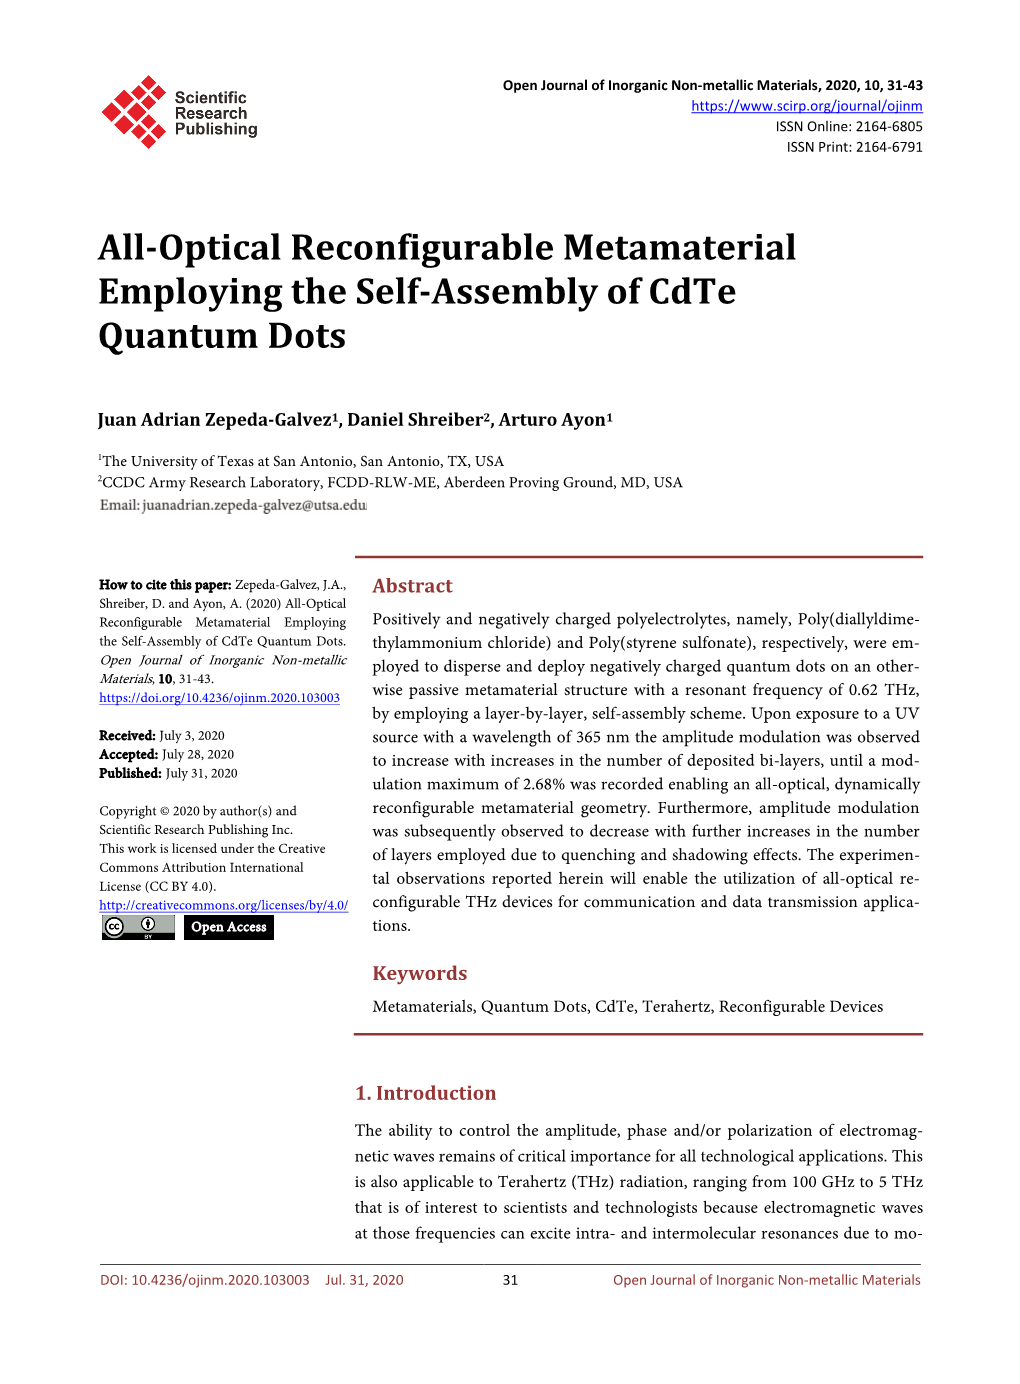 All-Optical Reconfigurable Metamaterial Employing the Self-Assembly of Cdte Quantum Dots